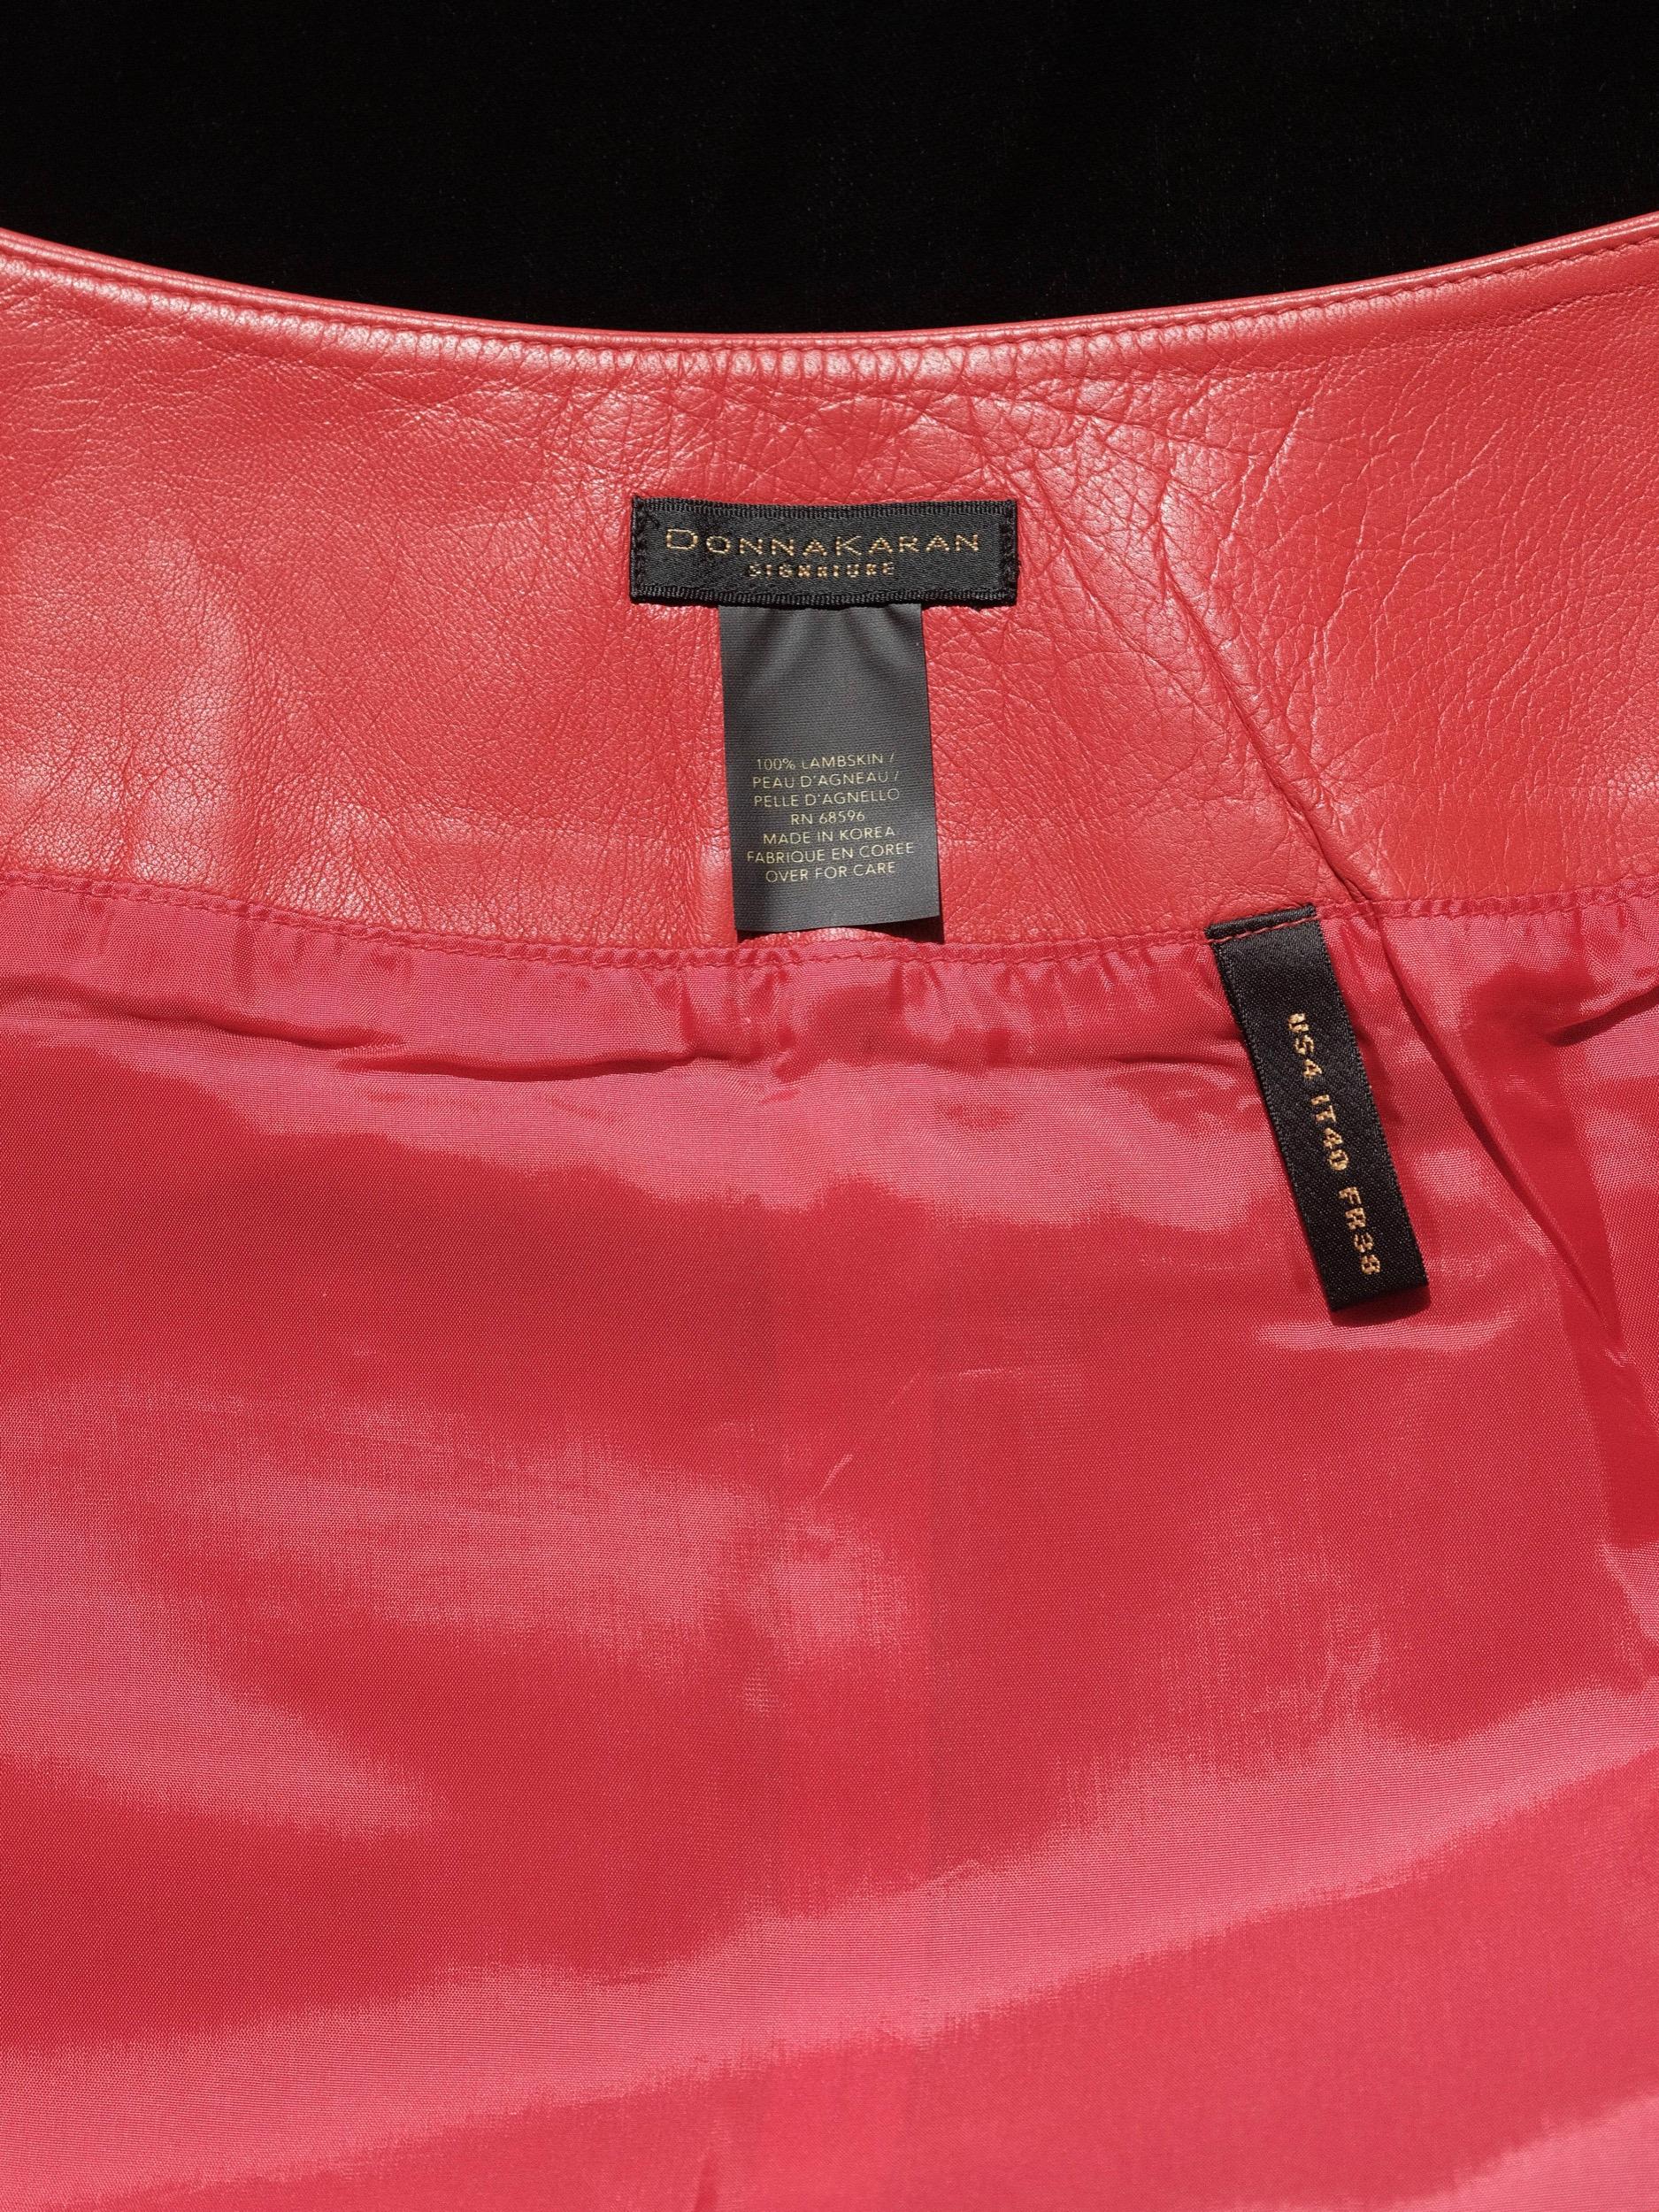 Donna Karan Leather Wrap Skirt Tomato Red Size US4 IT40 FR38 1990's For Sale 10